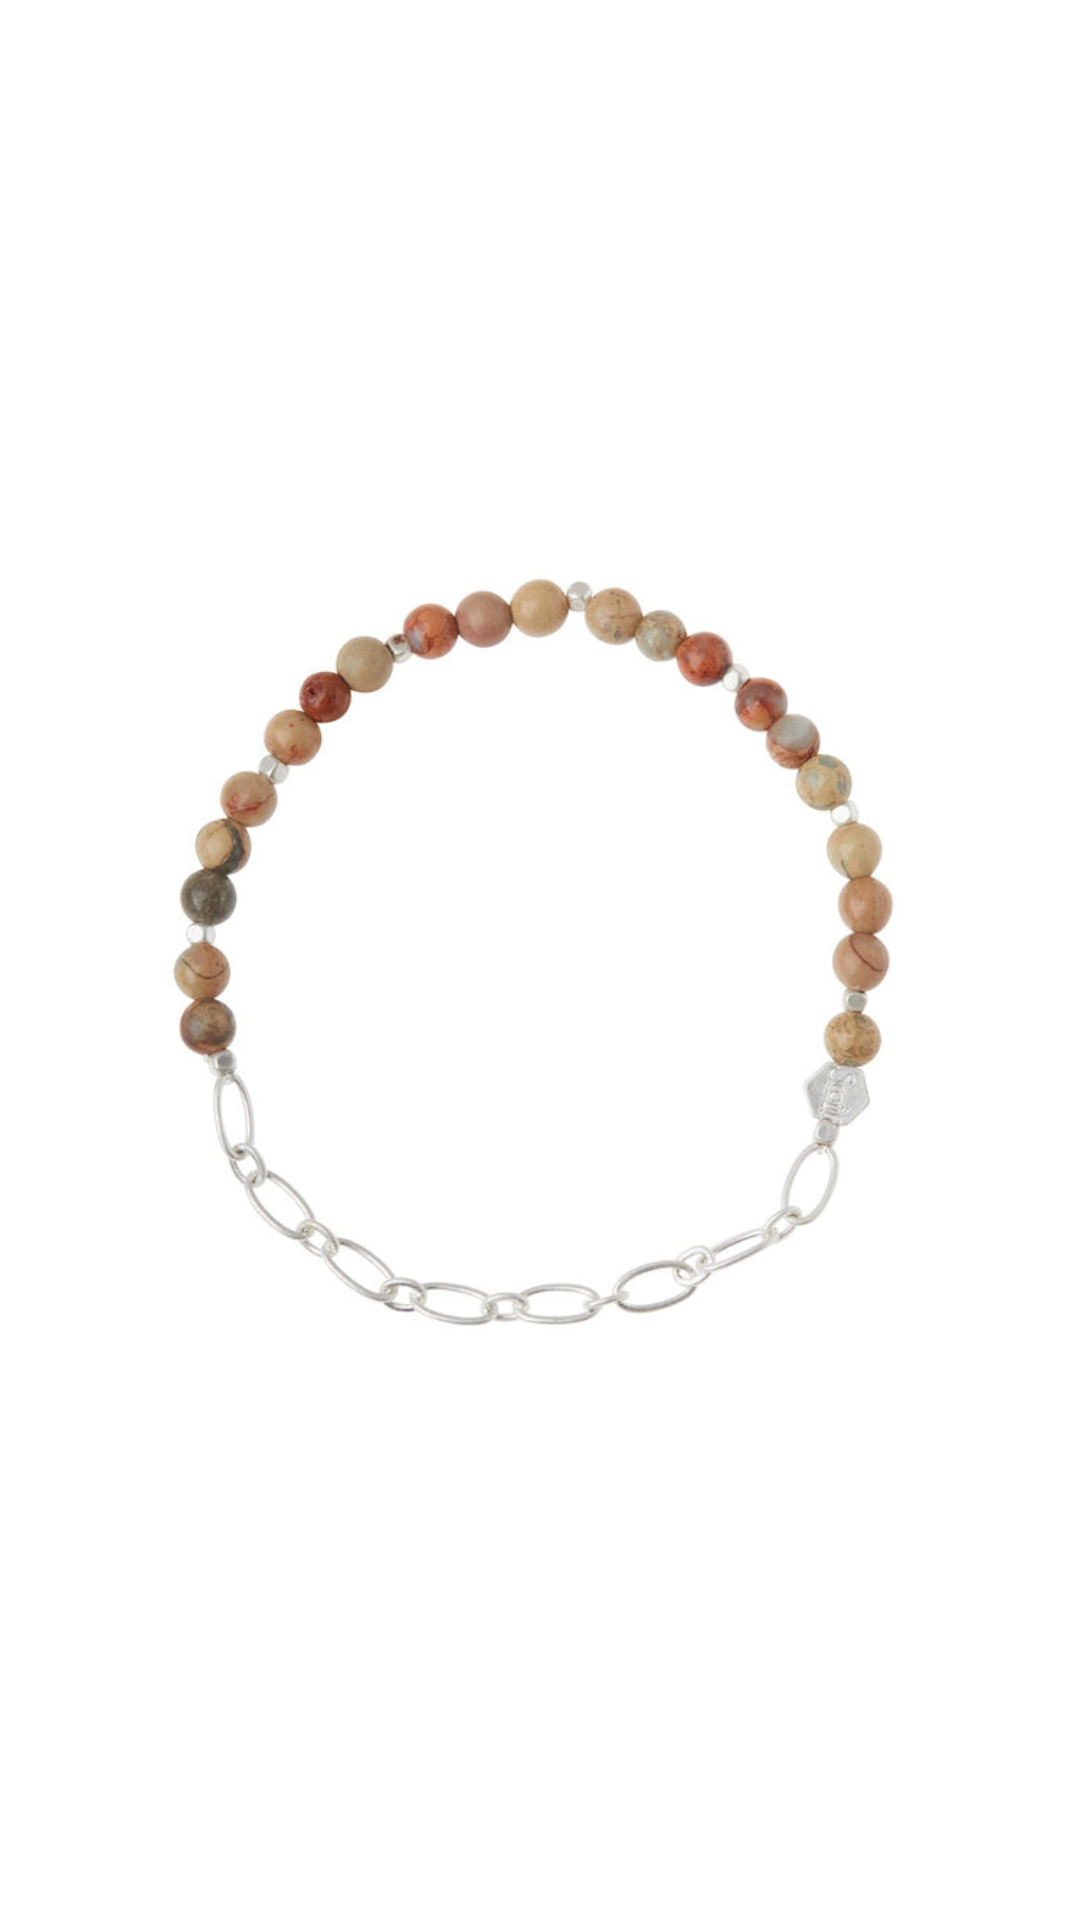 Mini Stone with Chain Stacking Bracelet